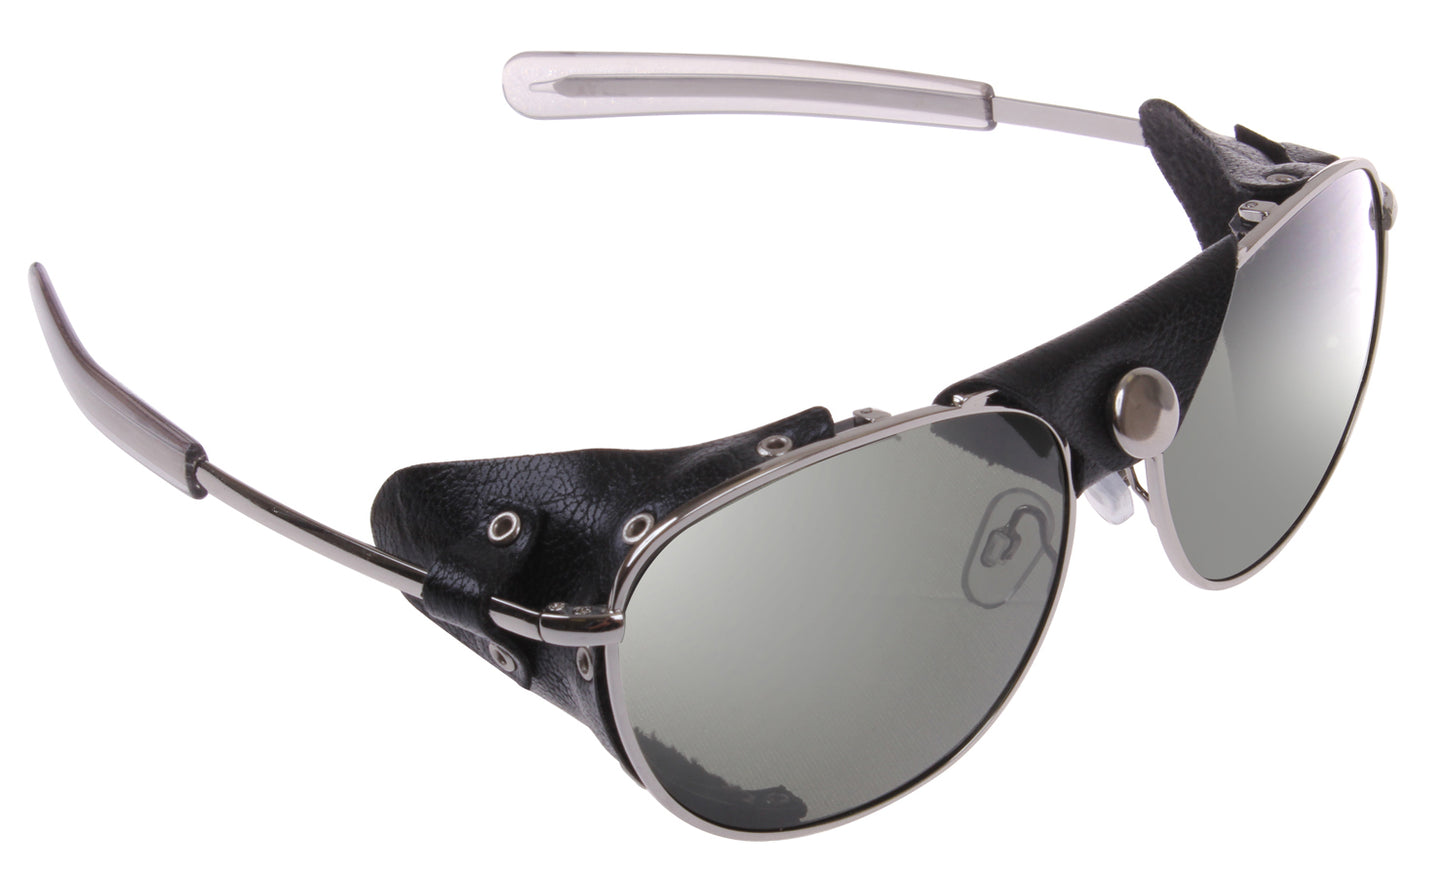 Tactical Aviator Sunglasses With Wind Guards